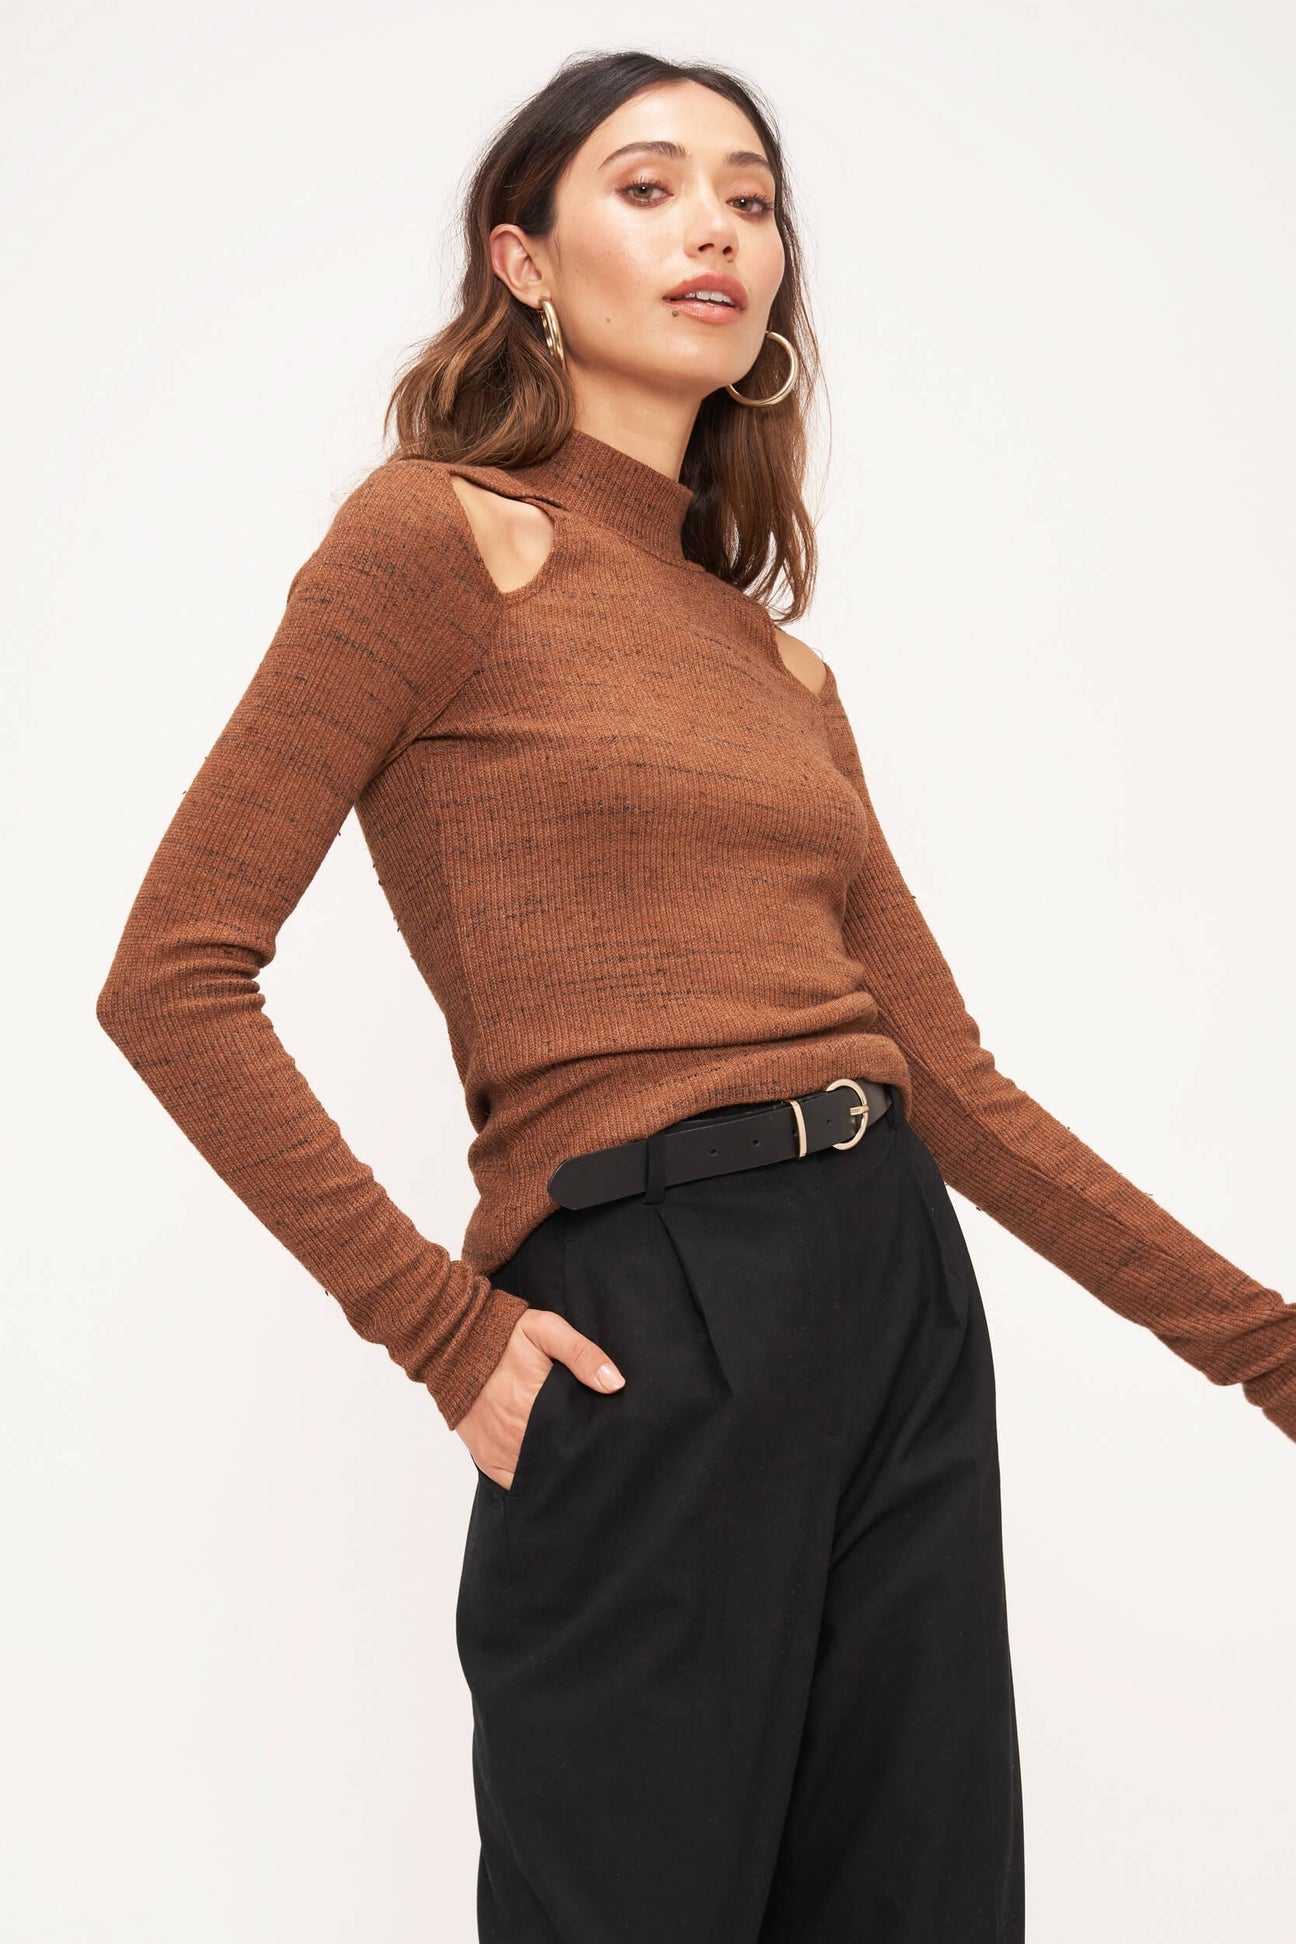 Cinnamon Spice Chloe Cut-Out Fitted Mock Neck Top